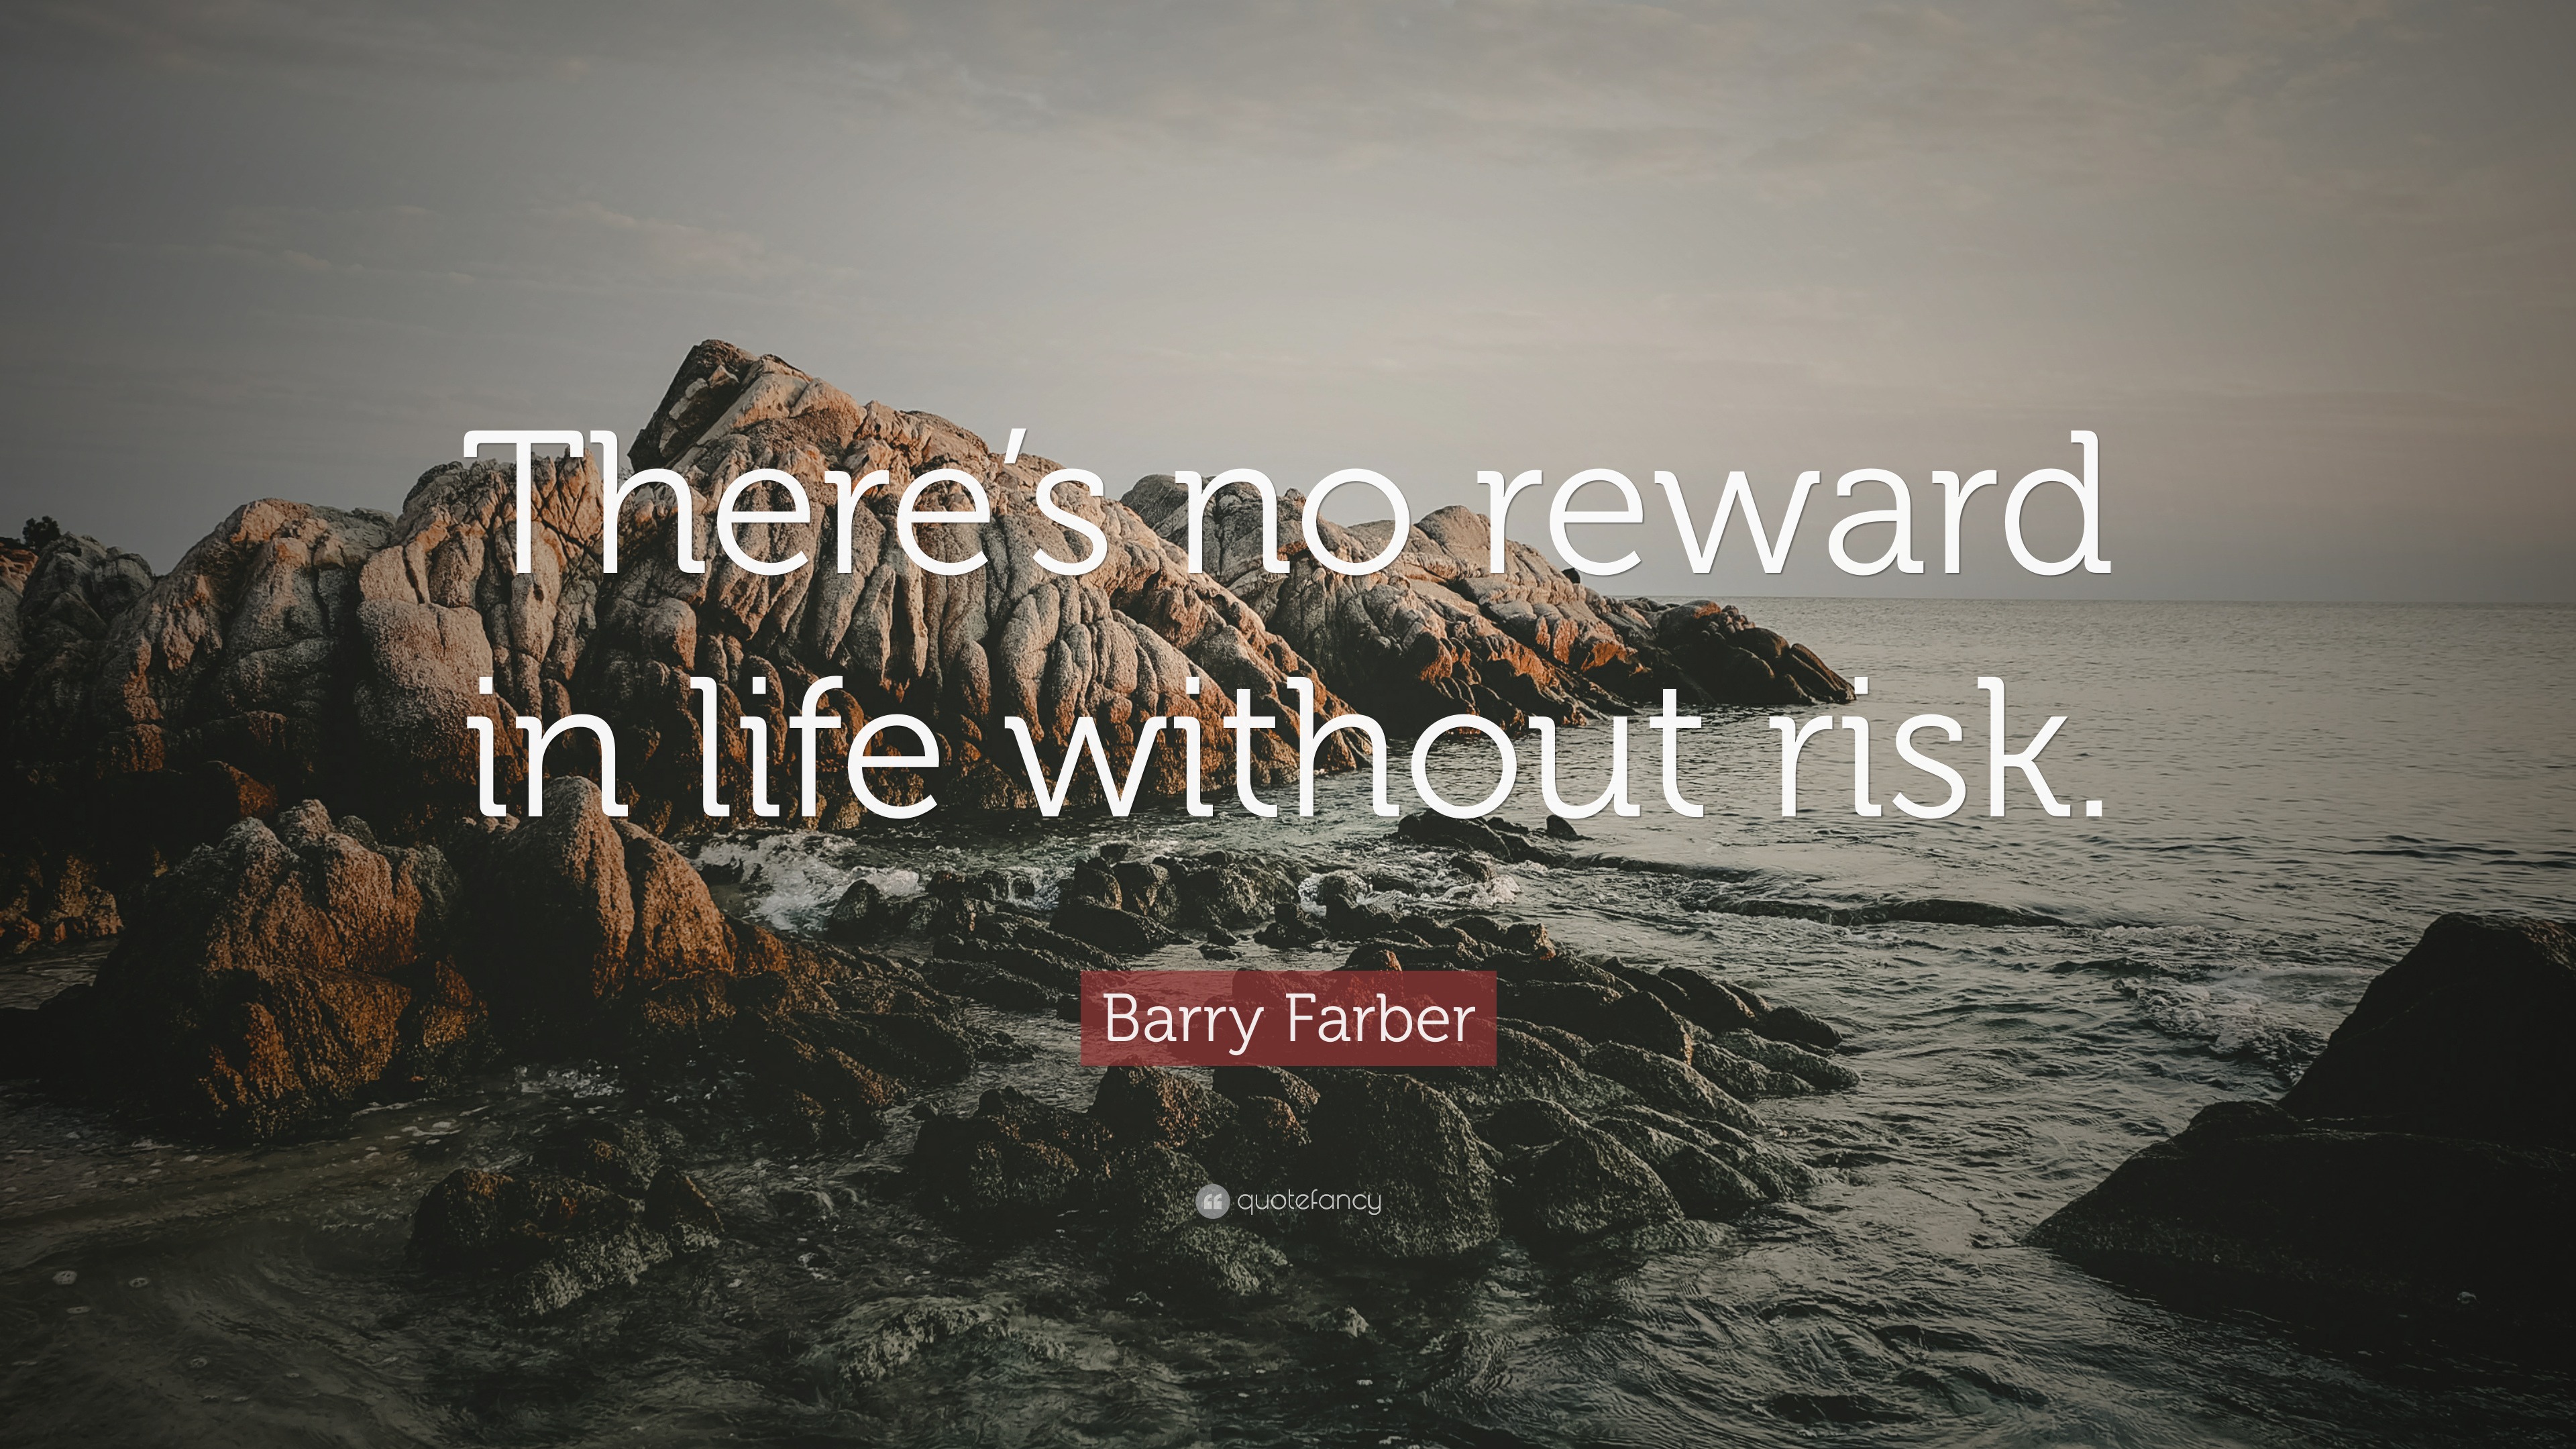 Barry Farber Quote “There s no reward in life without risk ”